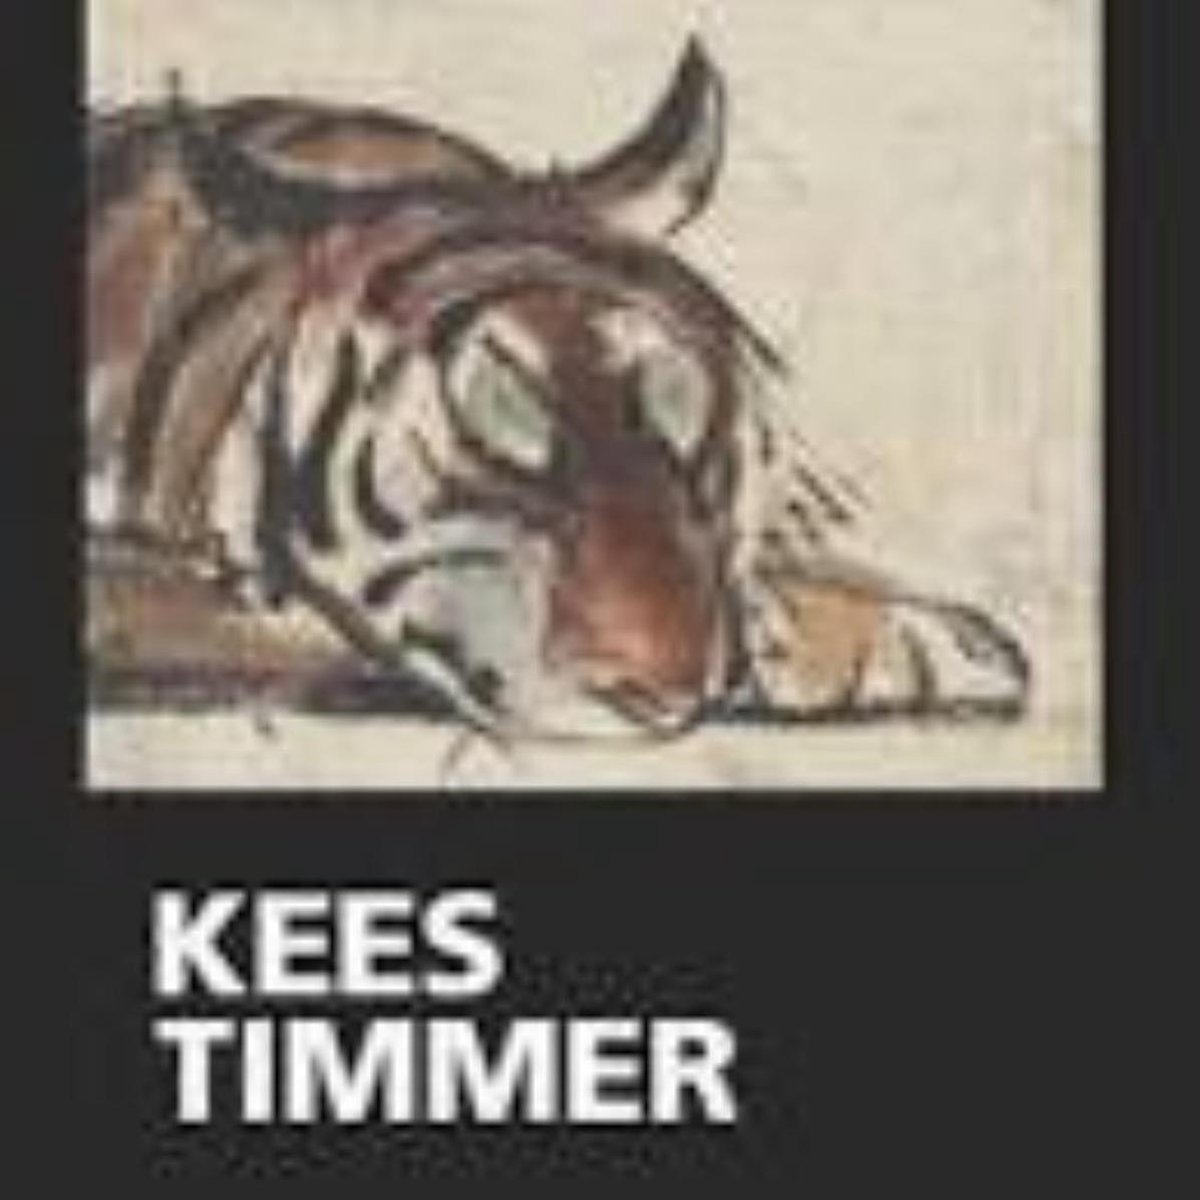 Kees Timmer